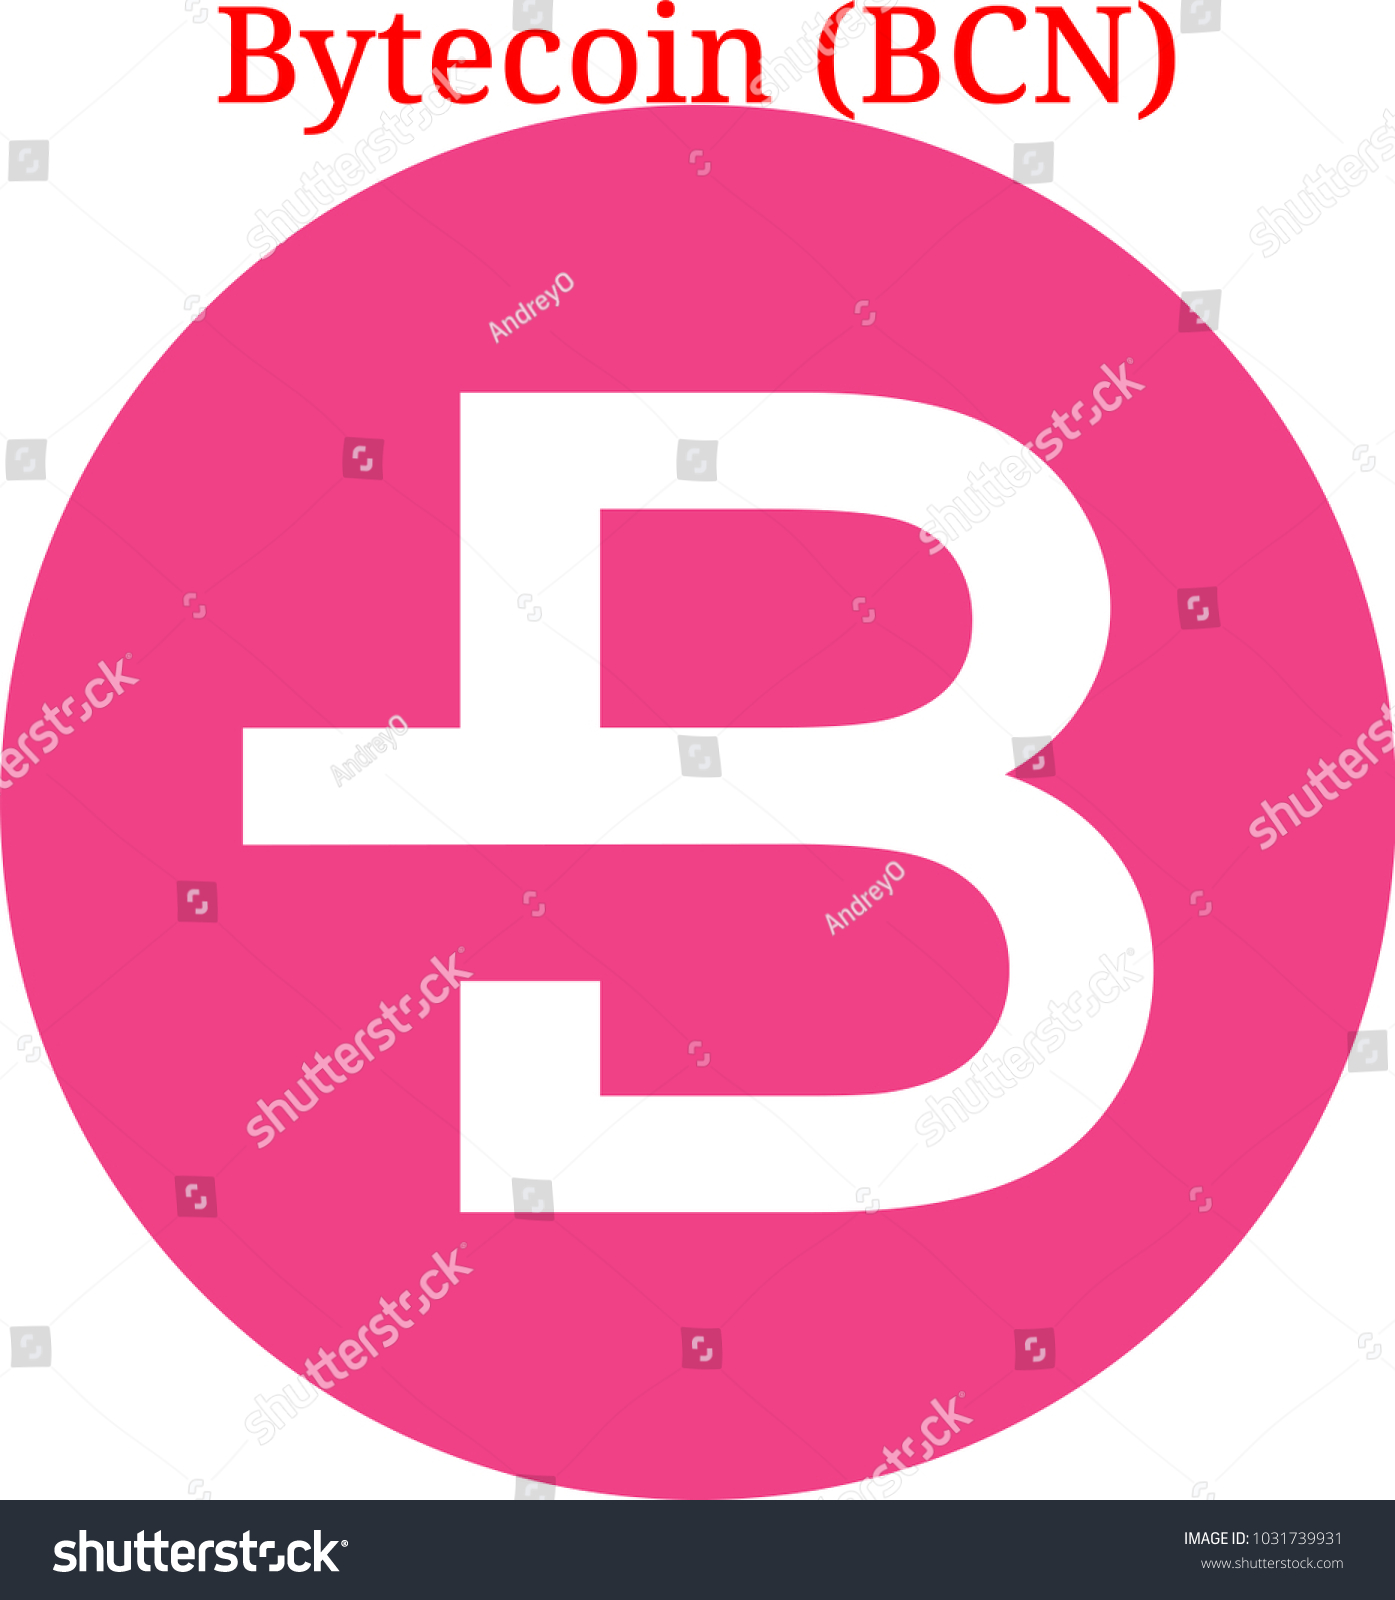 SVG of Vector Bytecoin (BCN) digital cryptocurrency logo. Bytecoin (BCN) icon. Vector illustration isolated on white background. svg